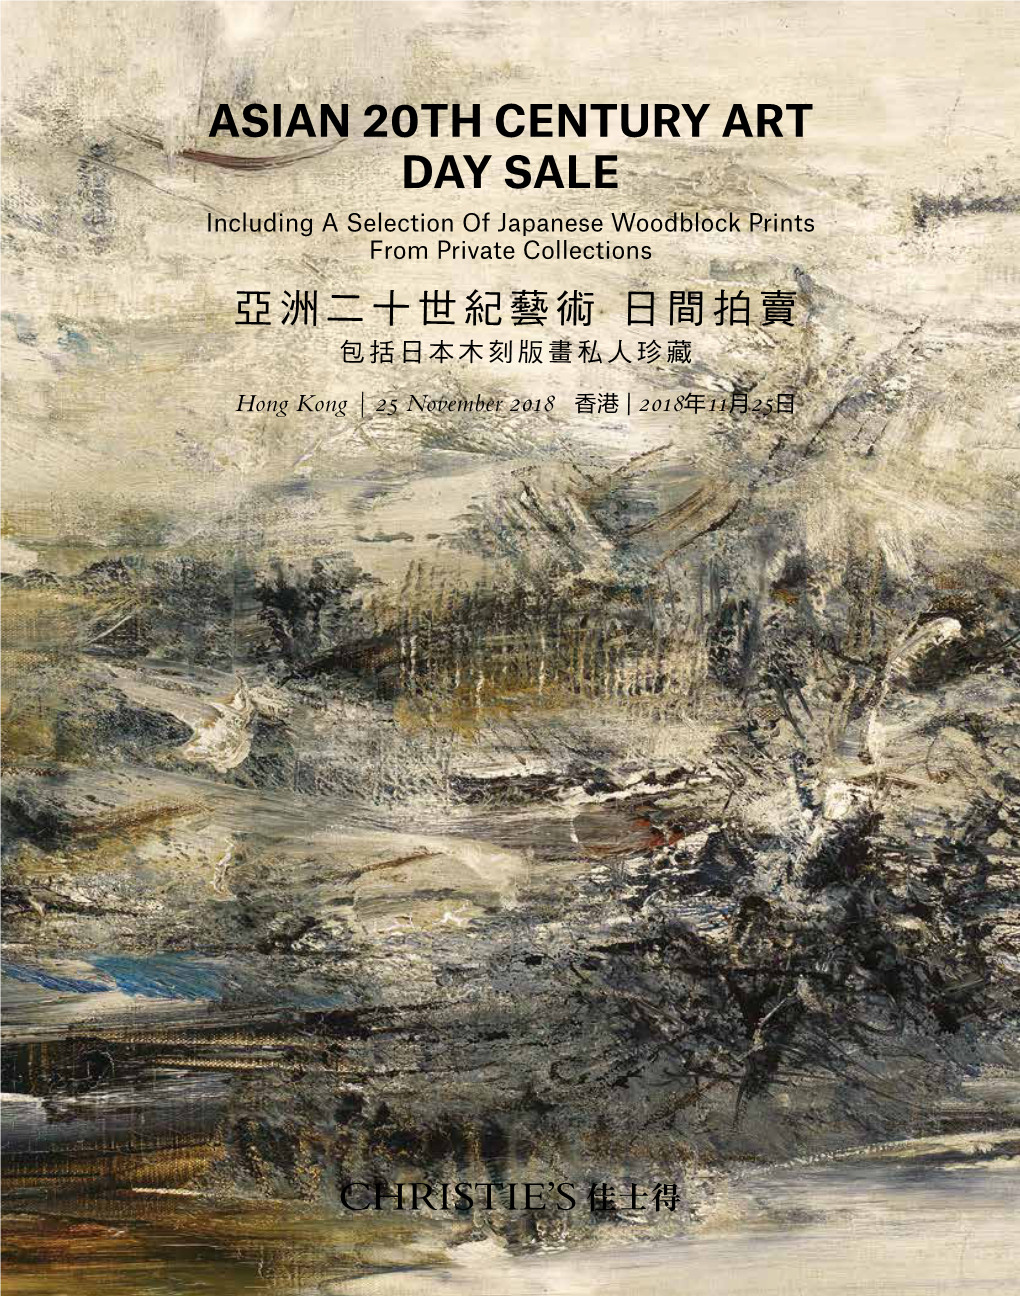 ASIAN 20TH CENTURY ART DAY SALE Including a Selection of Japanese Woodblock Prints from Private Collections 亞 洲 二 十 世 紀 藝 術 日 間 拍 賣 包 括 日 本 木 刻 版 畫 私 人 珍 藏